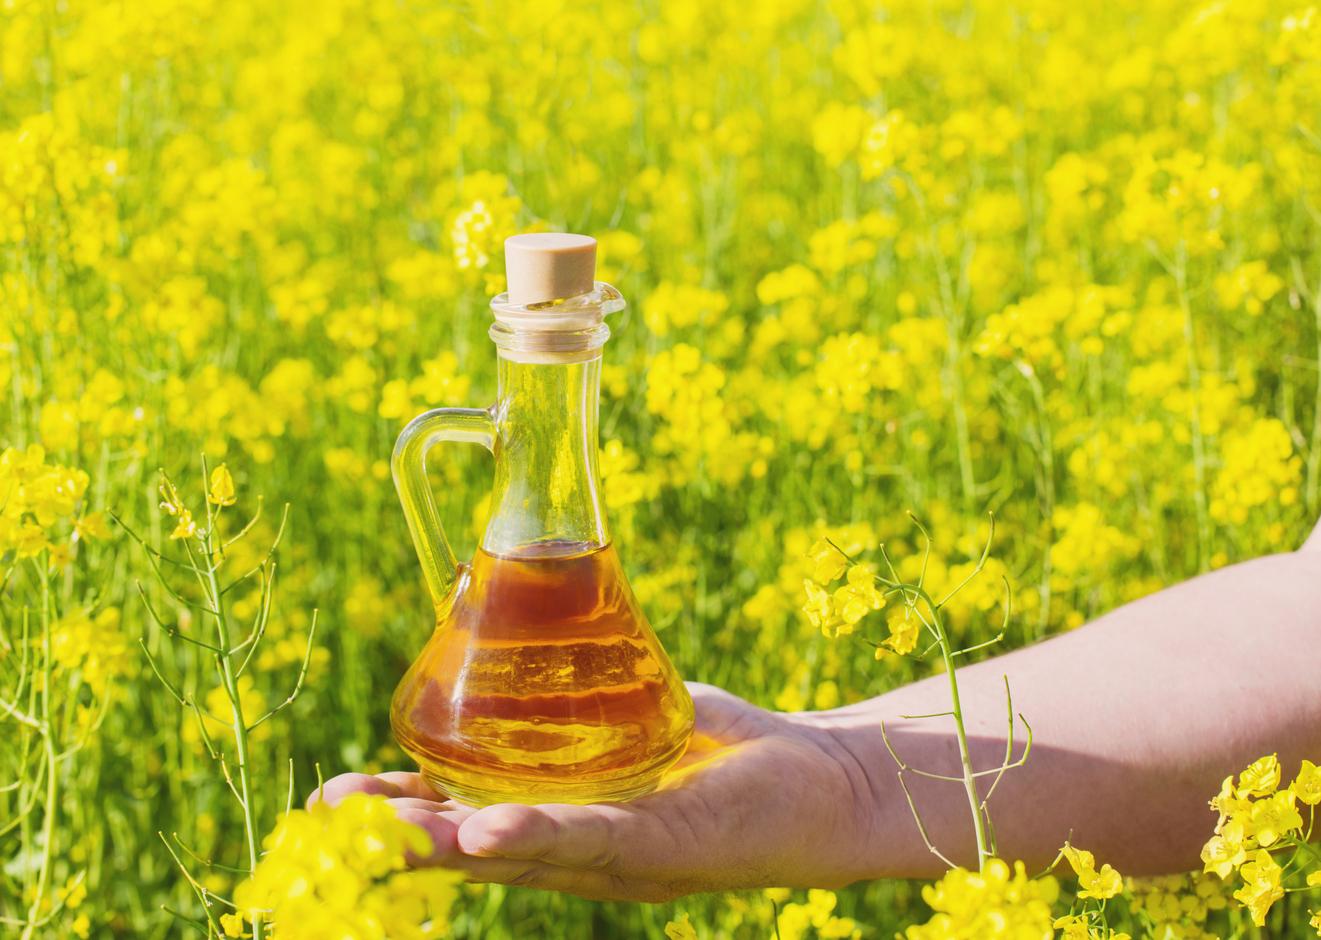 Groundnut Oil Supplier in India: The Future of the Groundnut Oil Industry